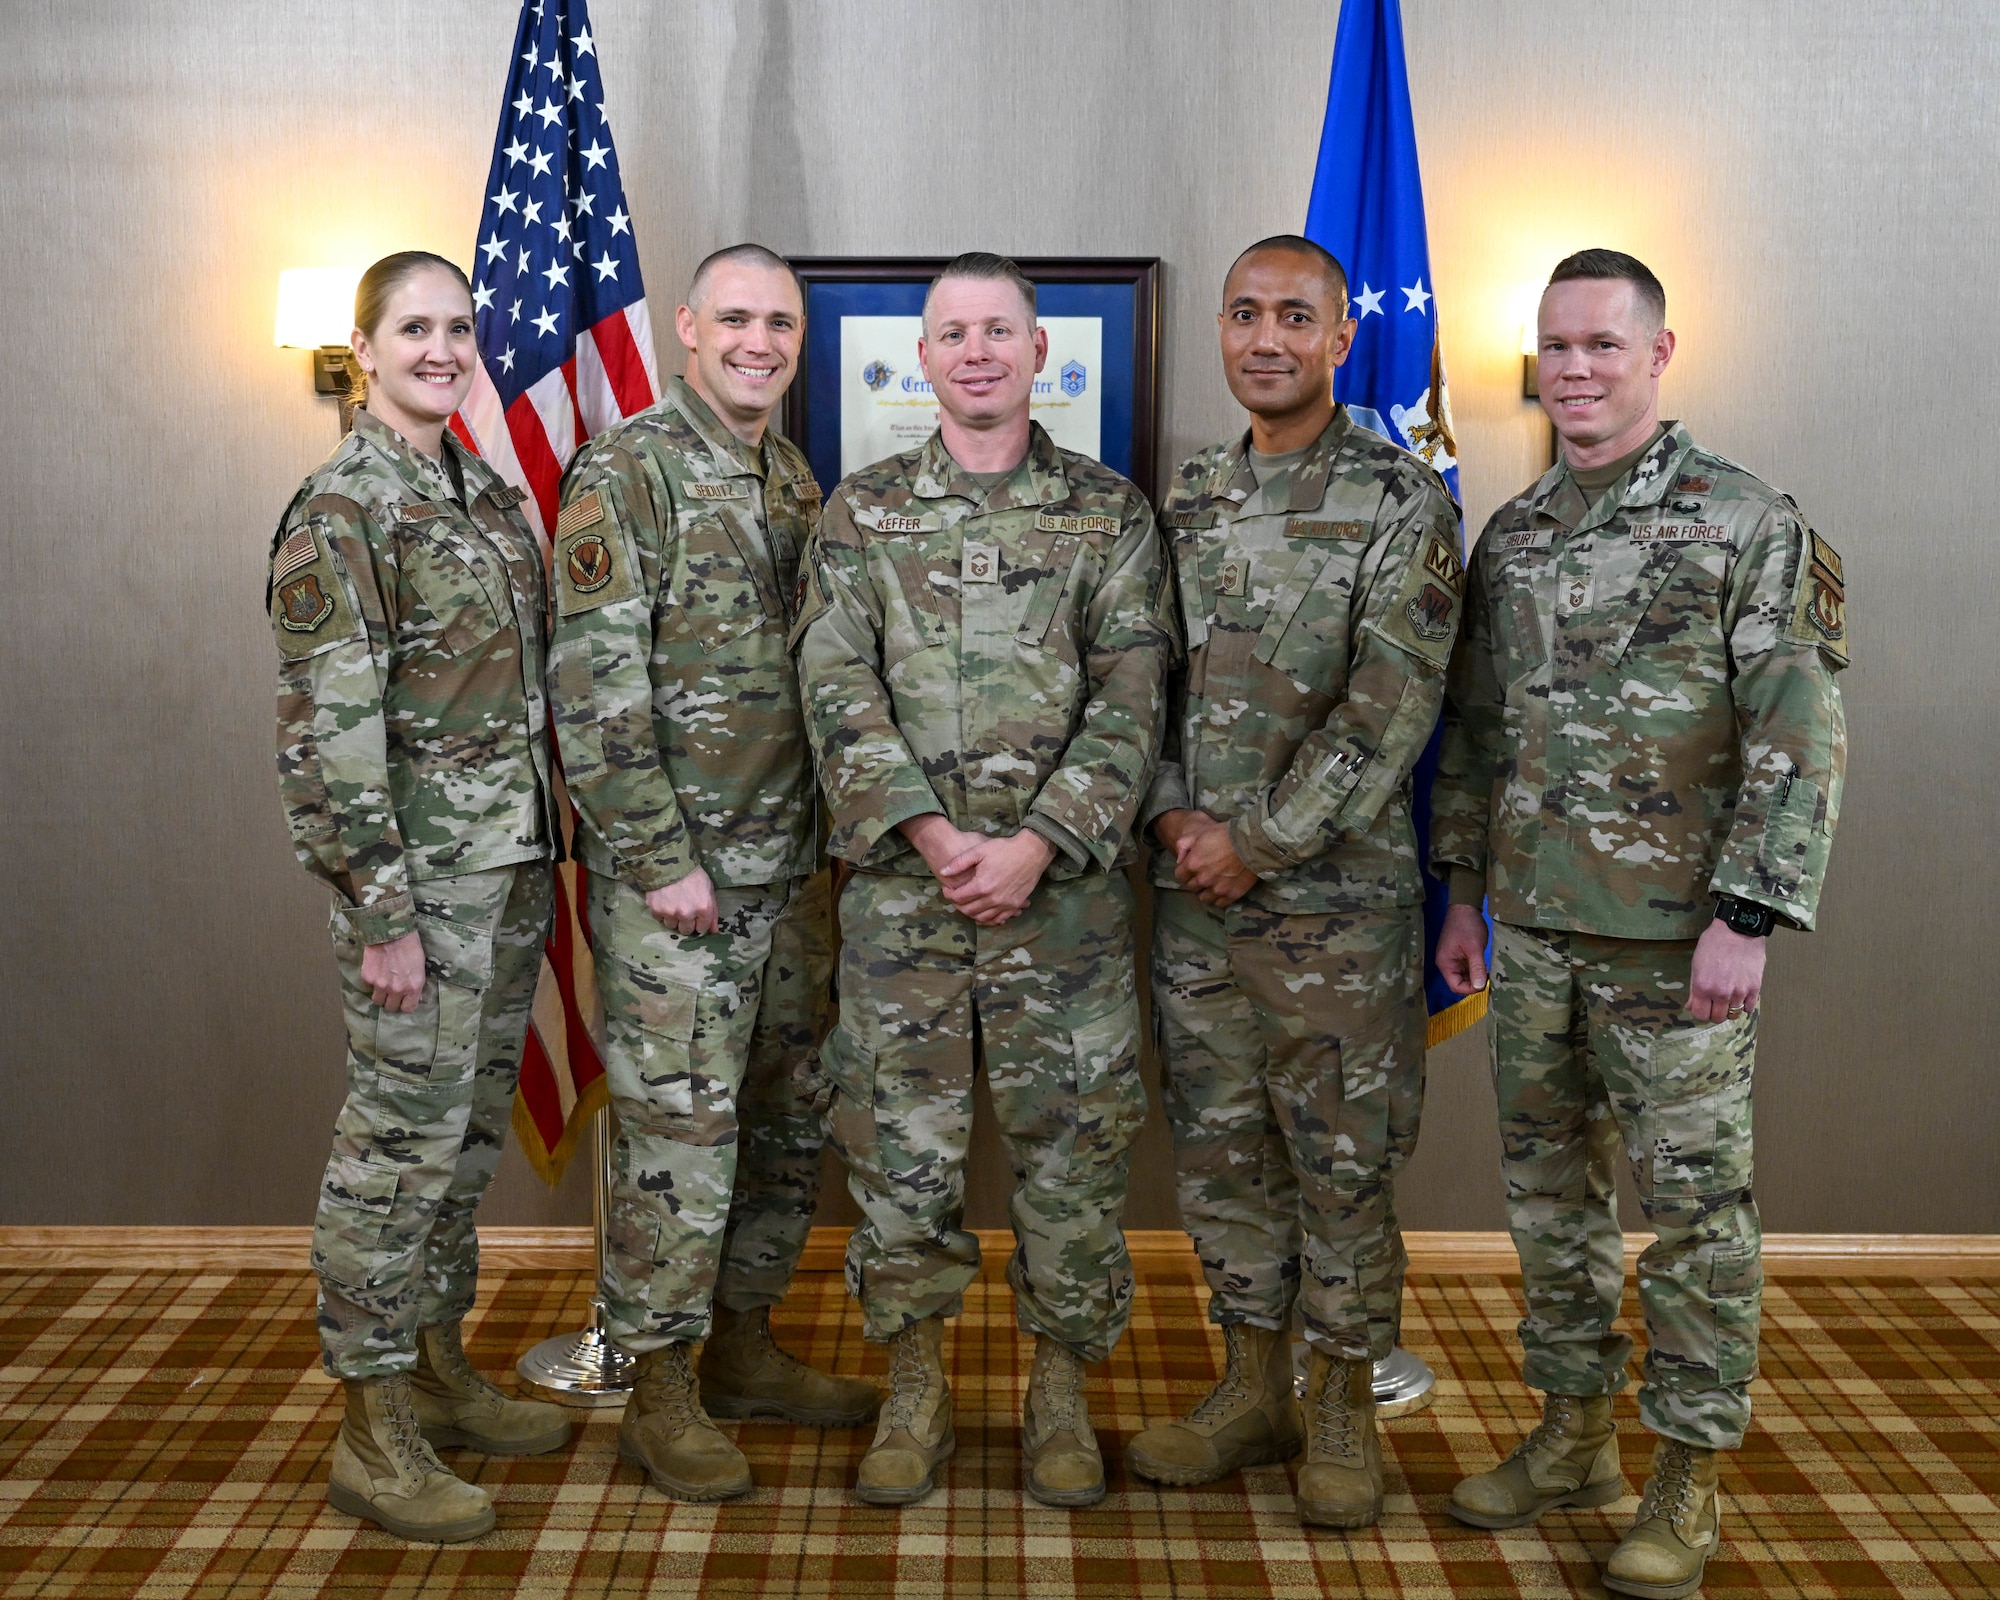 Five members in uniform stand in front of an American flag and an Air Force military flag